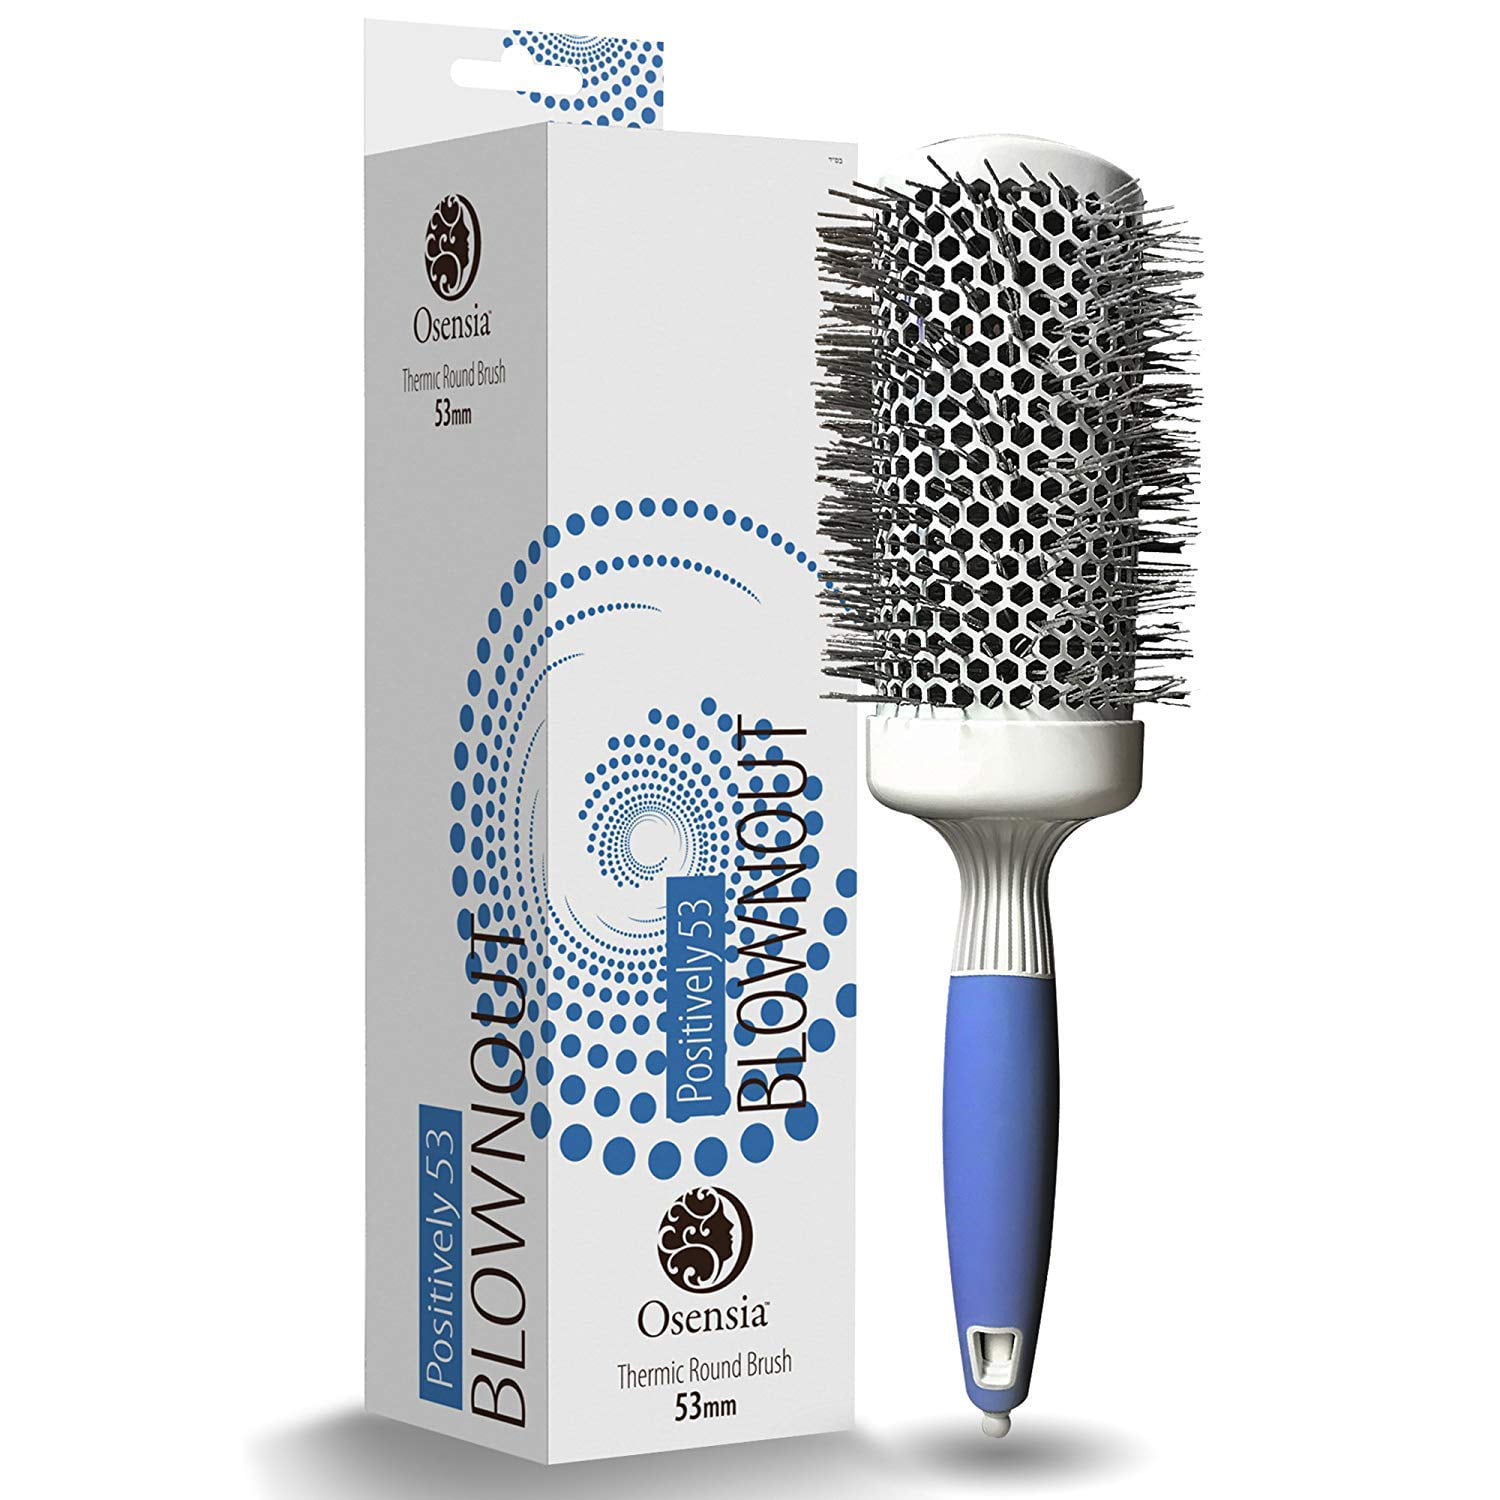 Osensia Blownout Large Ceramic Ion Thermic Round Brush for Blow Drying, 2  inch - Walmart.com